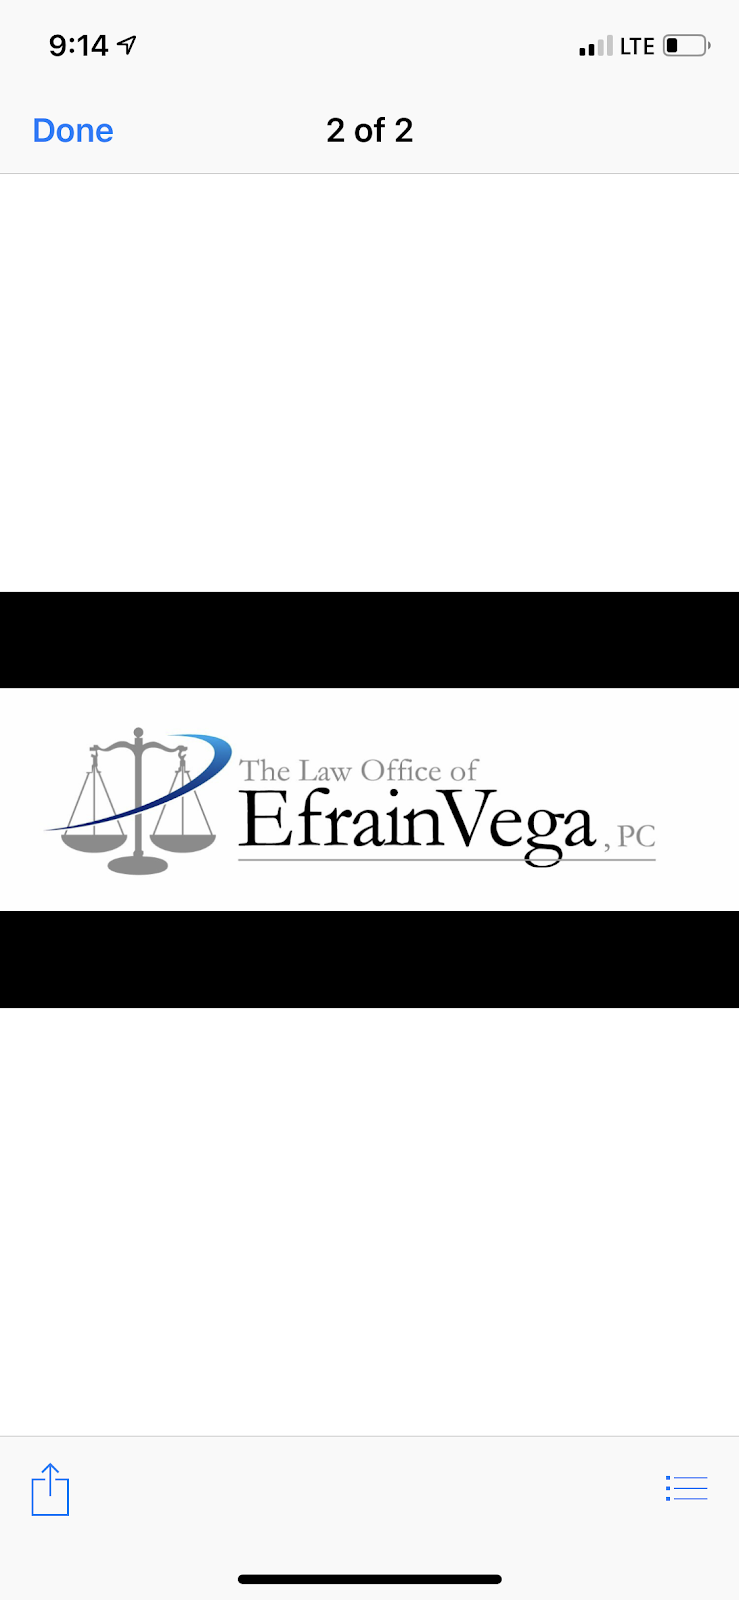 The Law Office of Efrain Vega PC | 2251 W 24th St, Chicago, IL 60608, USA | Phone: (773) 847-7300